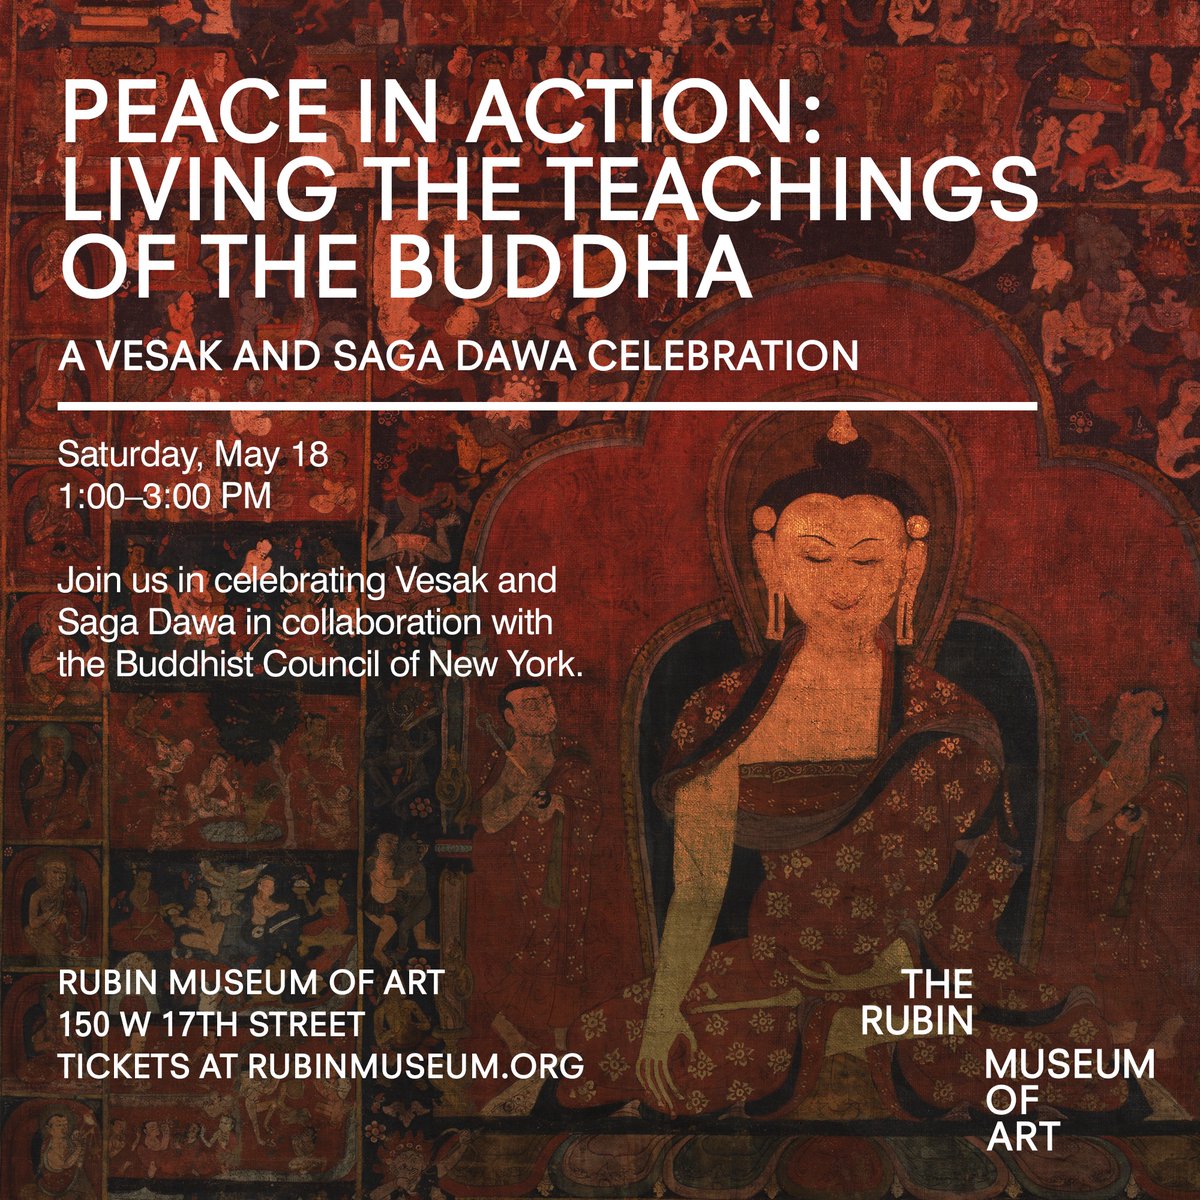 Join us in celebrating Vesak and Saga Dawa in collaboration with the Buddhist Council of New York with an afternoon of reflection. Vesak and Saga Dawa celebrate Buddha Shakyamuni’s birth, enlightenment, and mahaparinirvana, or passing away. Learn more: rubinmuseum.org/events/event/p…